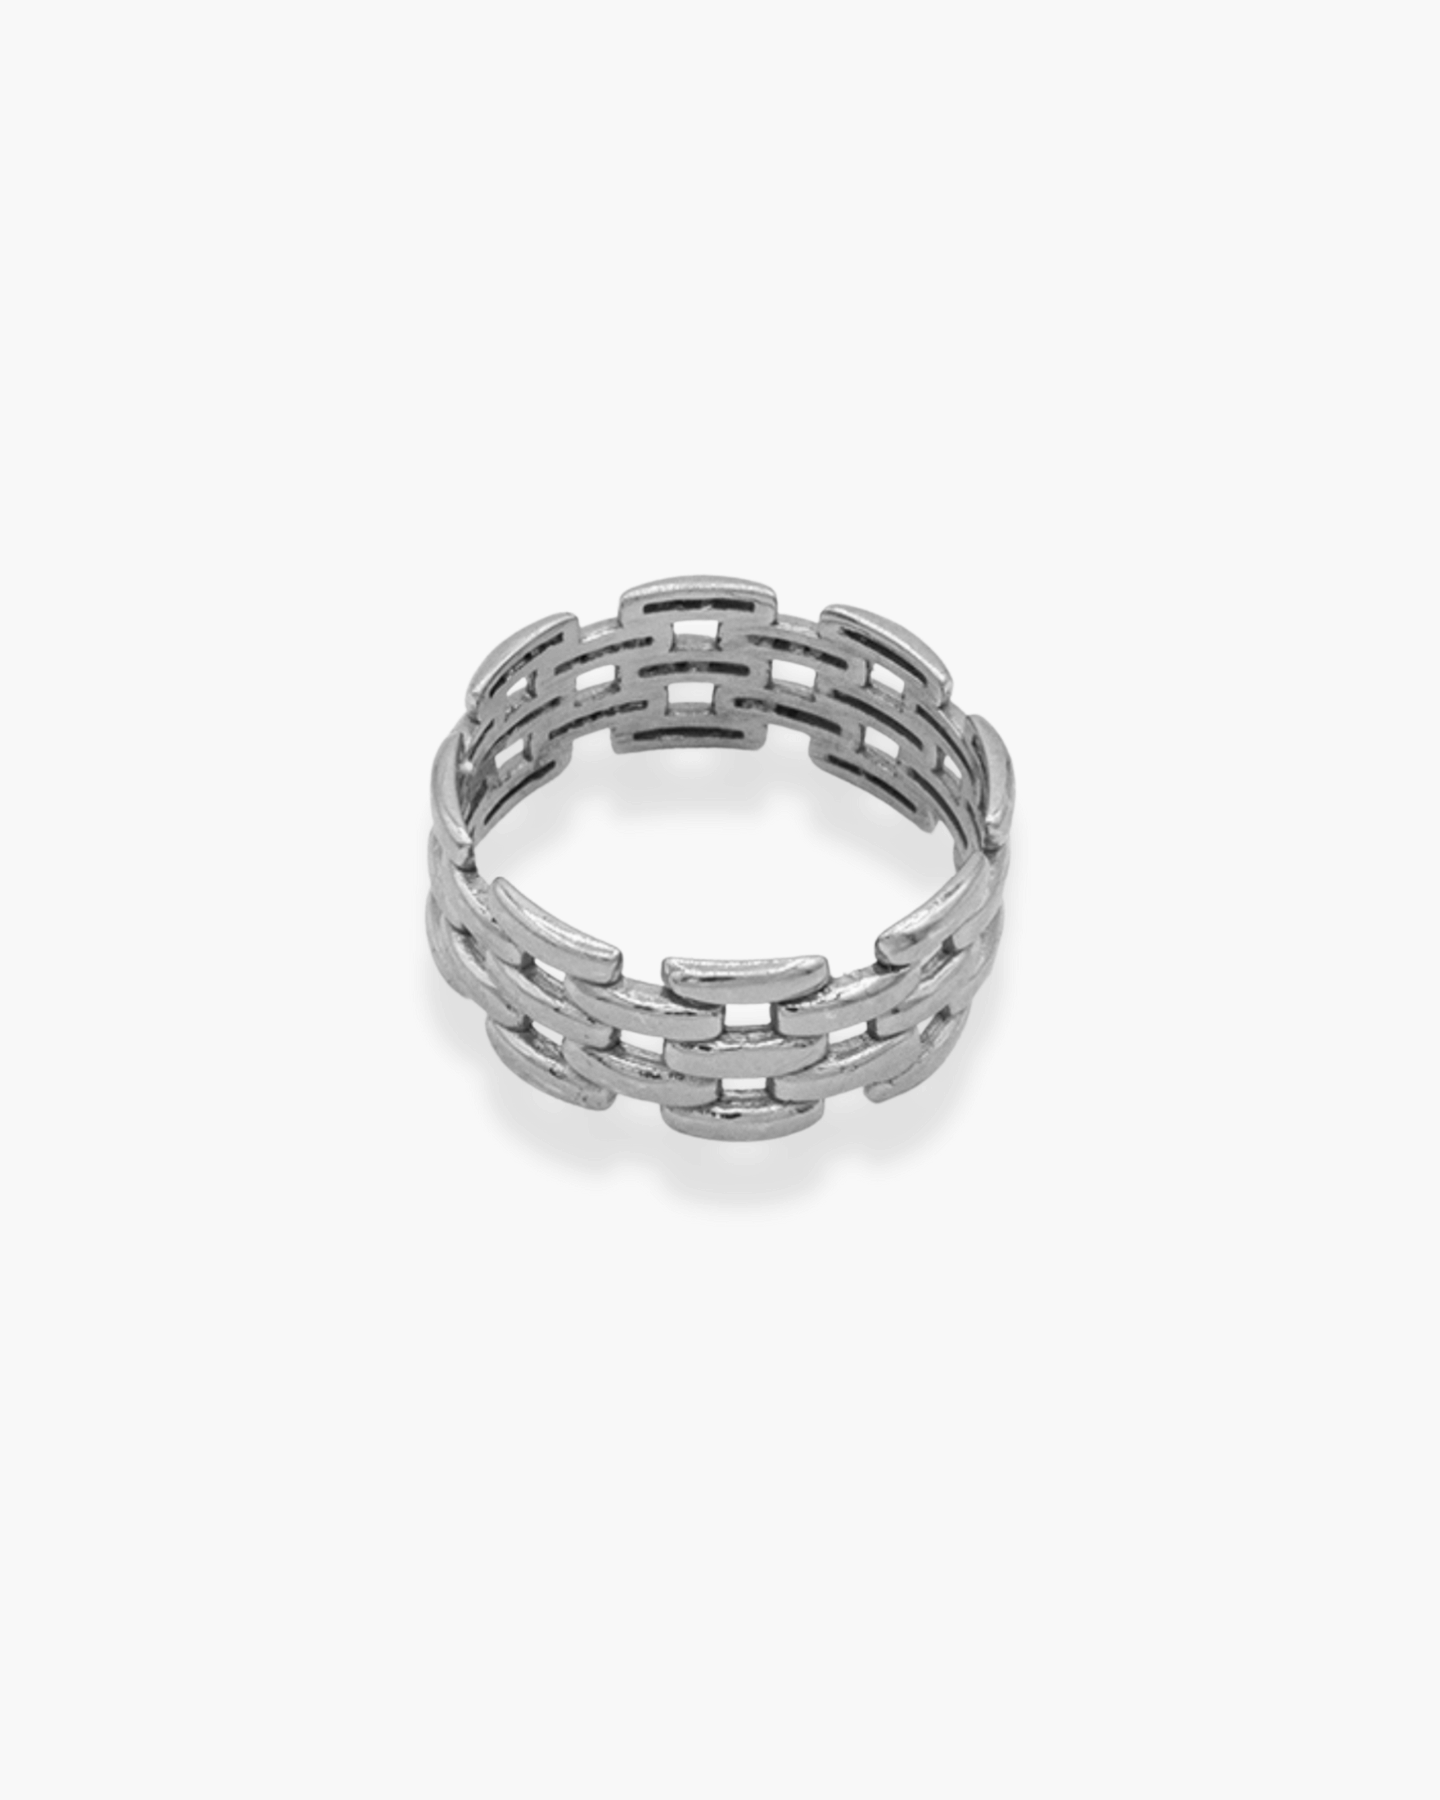 Linked Souls Ring Silver